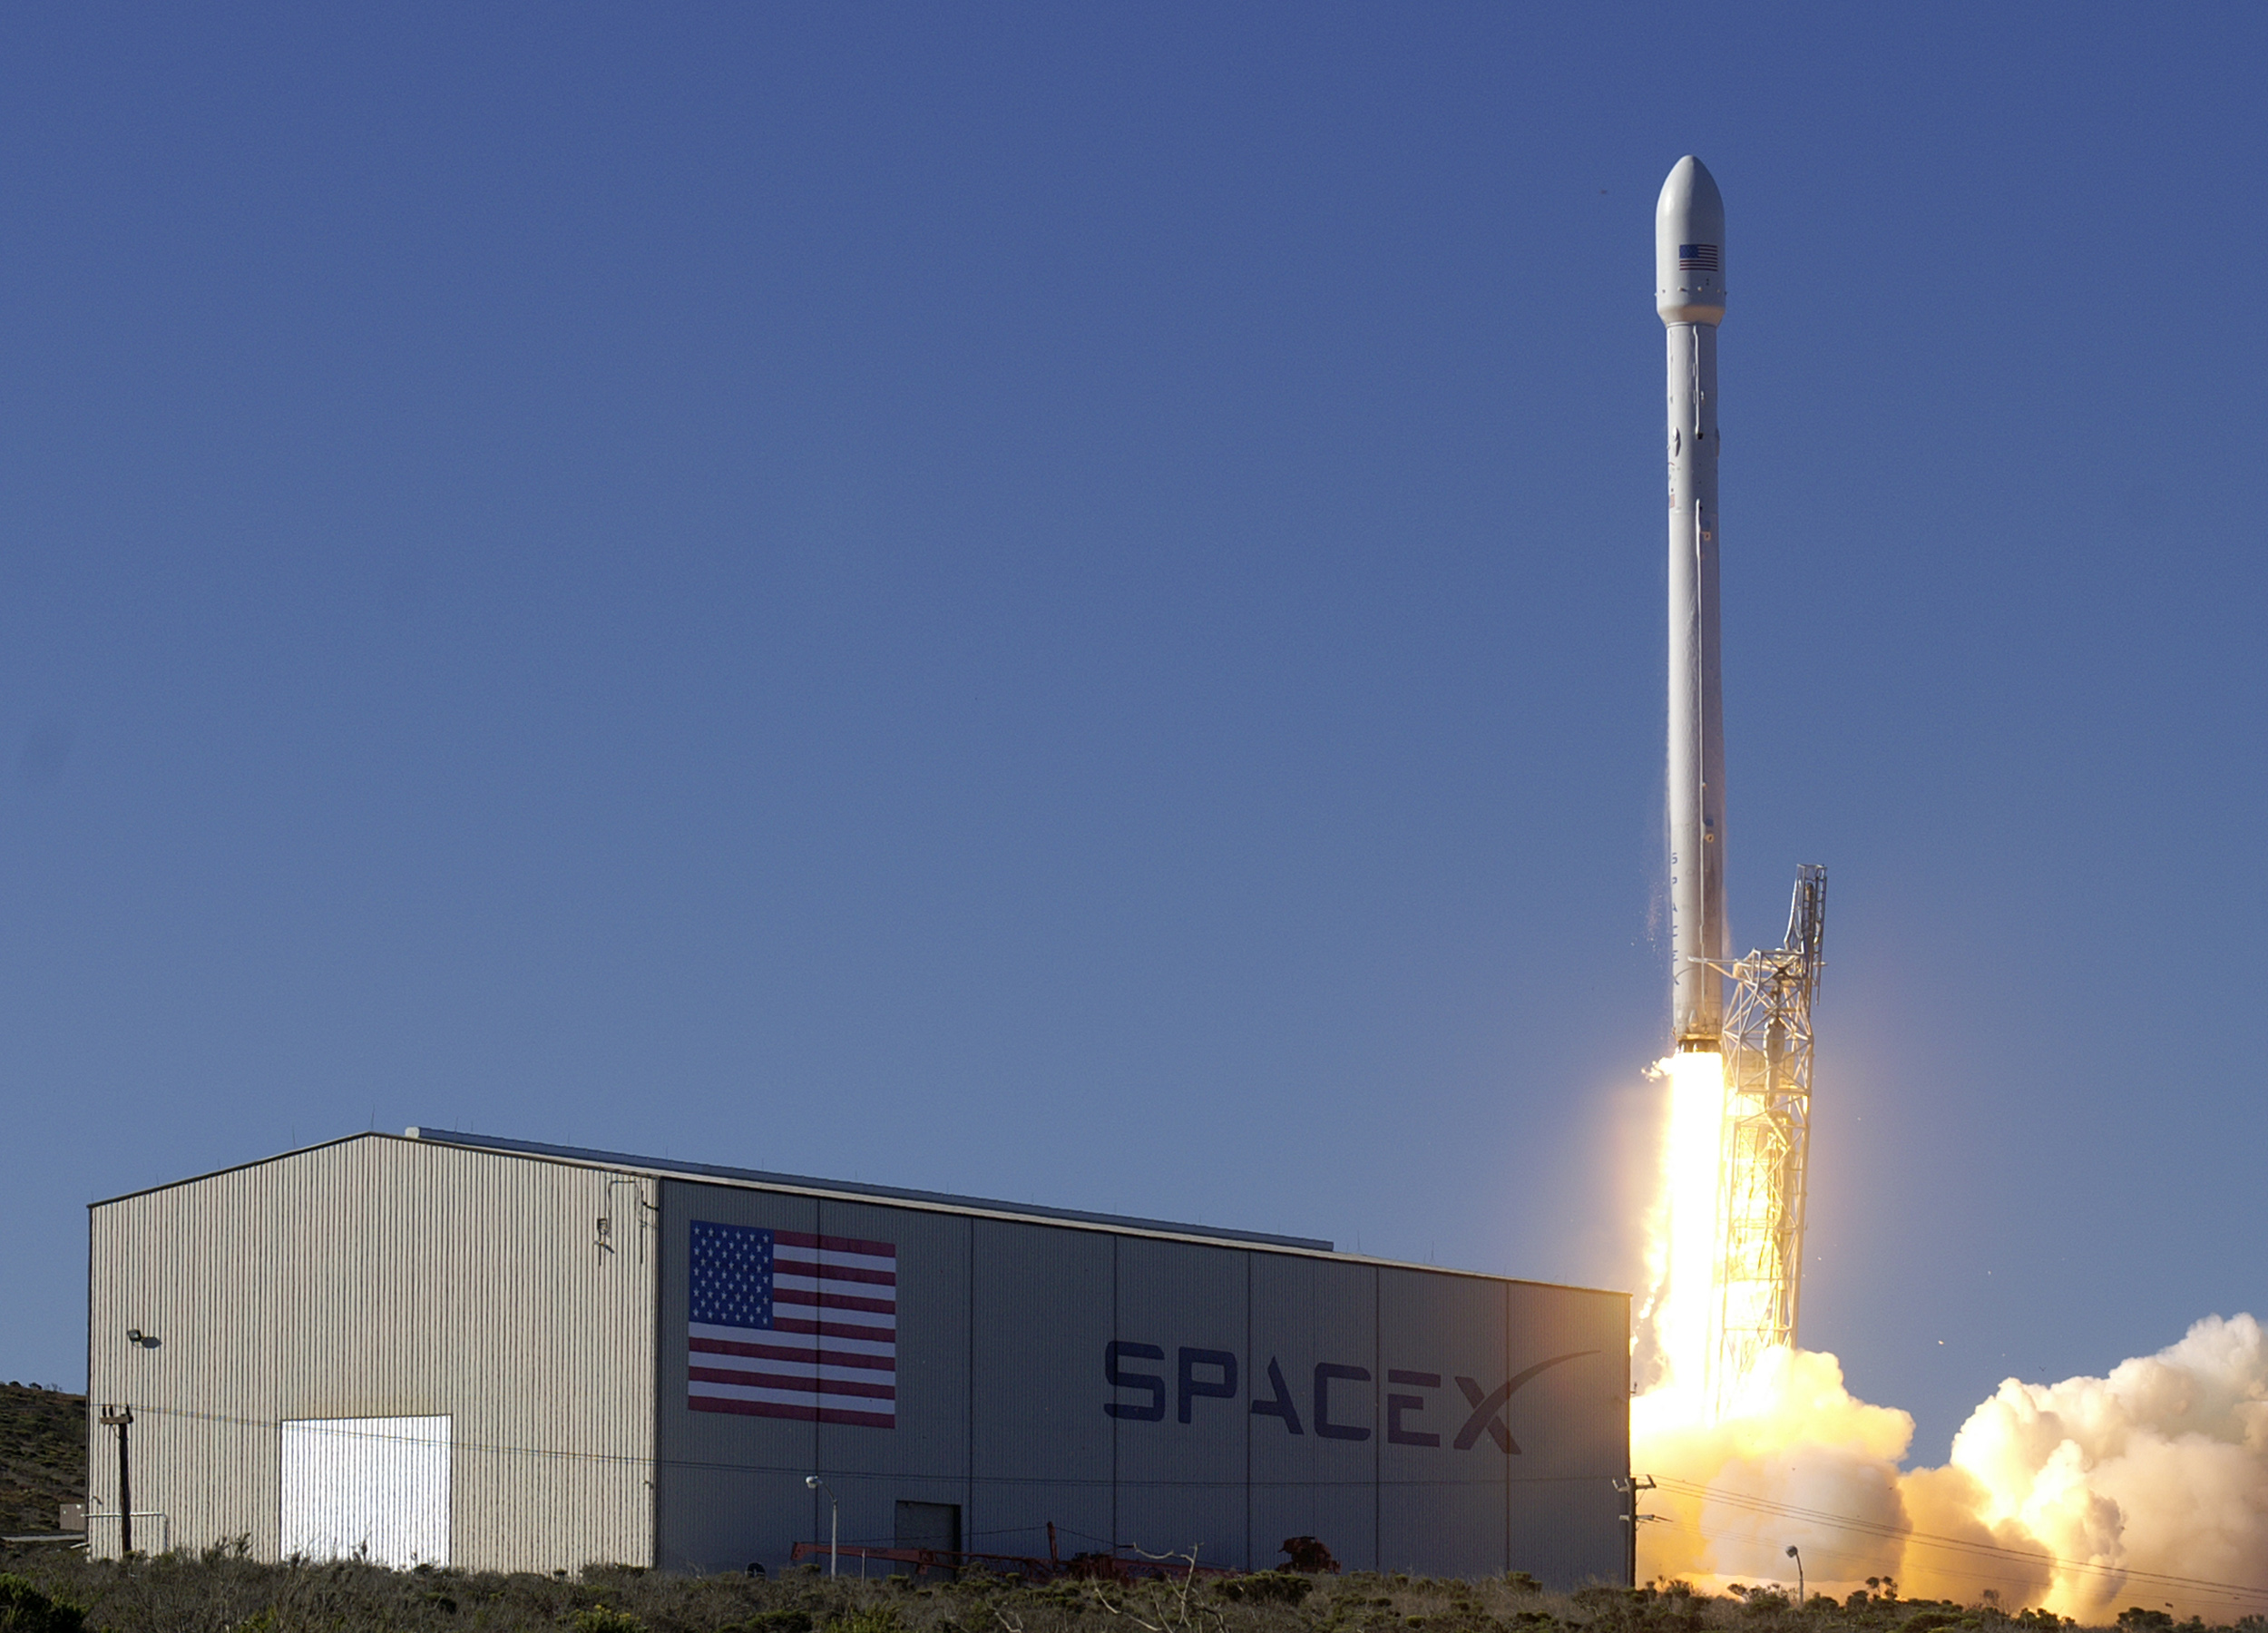 SpaceX Falcon 9 Rocket Successfully Launched after Florida Explosion